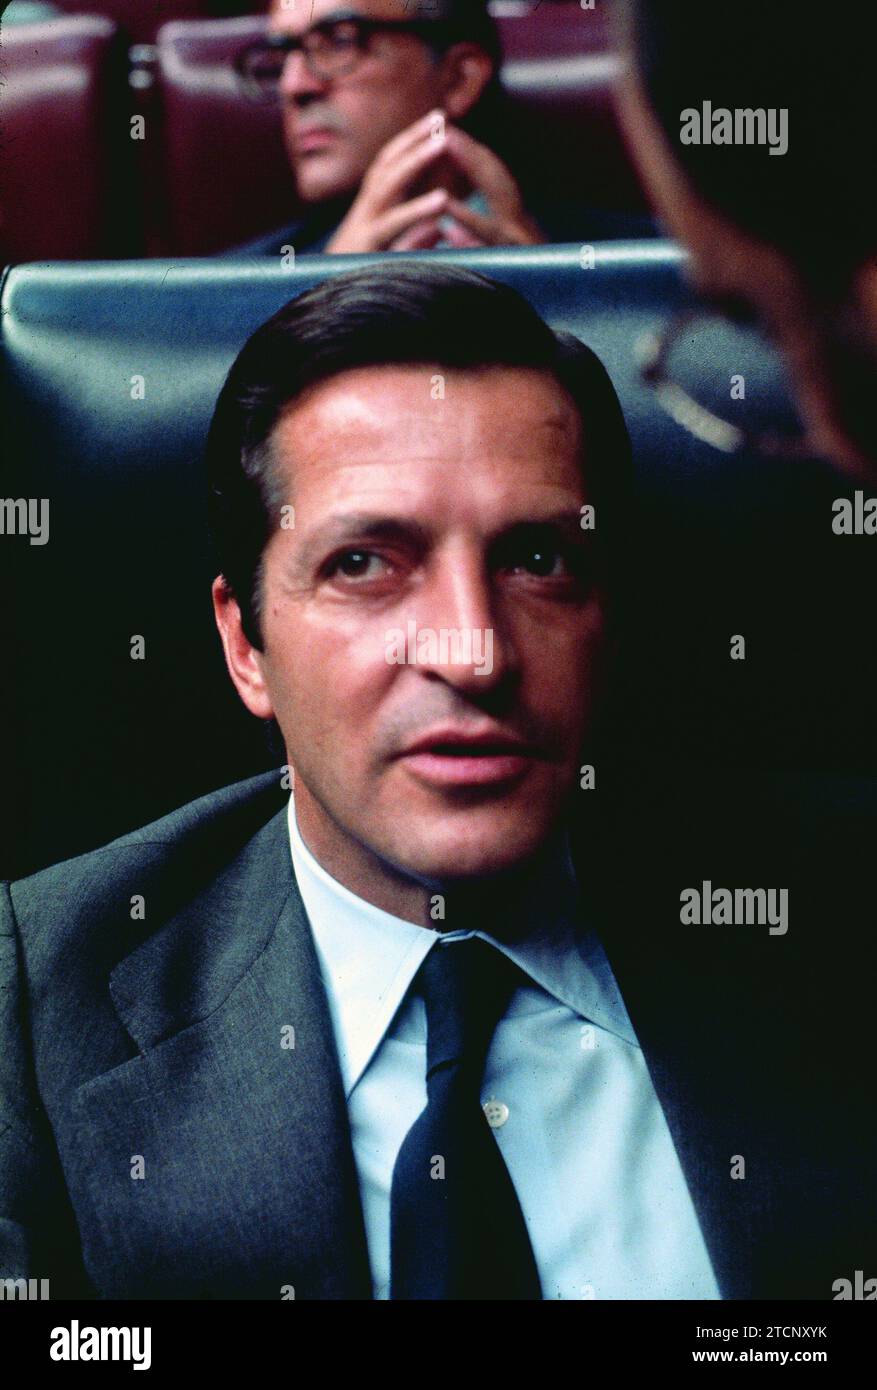 01/01/1980. Adolfo Suárez in his blue seat as President of the Government, in the Congress of Deputies. Behind him, his successor in office, Leopoldo Calvo Sotelo. Credit: Album / Archivo ABC Stock Photo